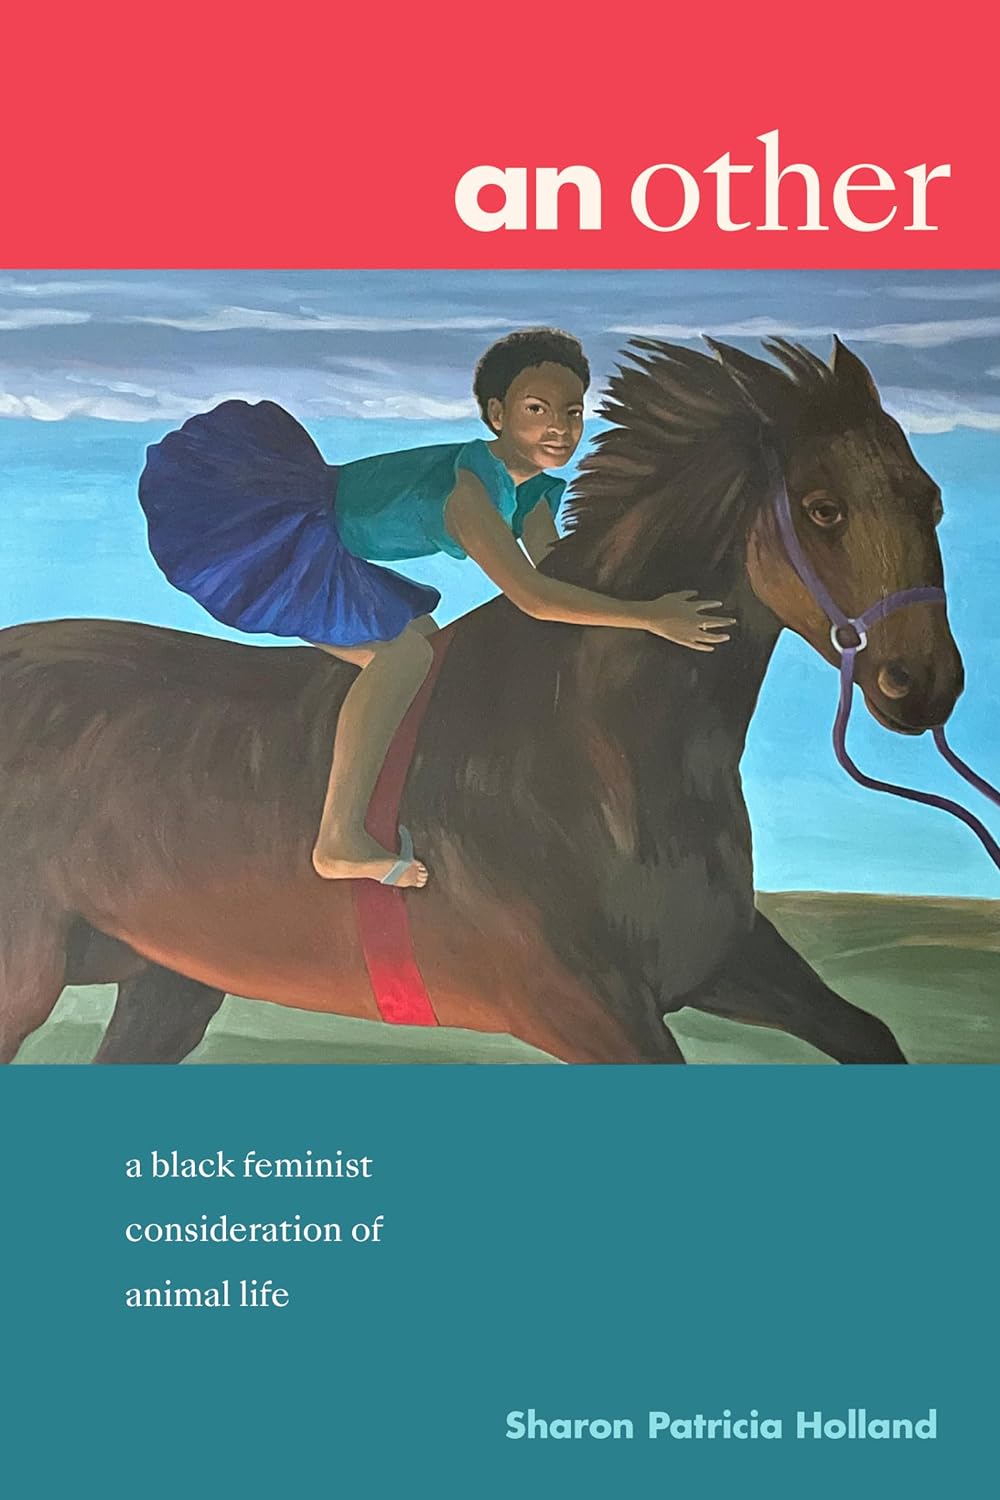 an other: a black feminist consideration of animal life by Sharon Patricia Holland